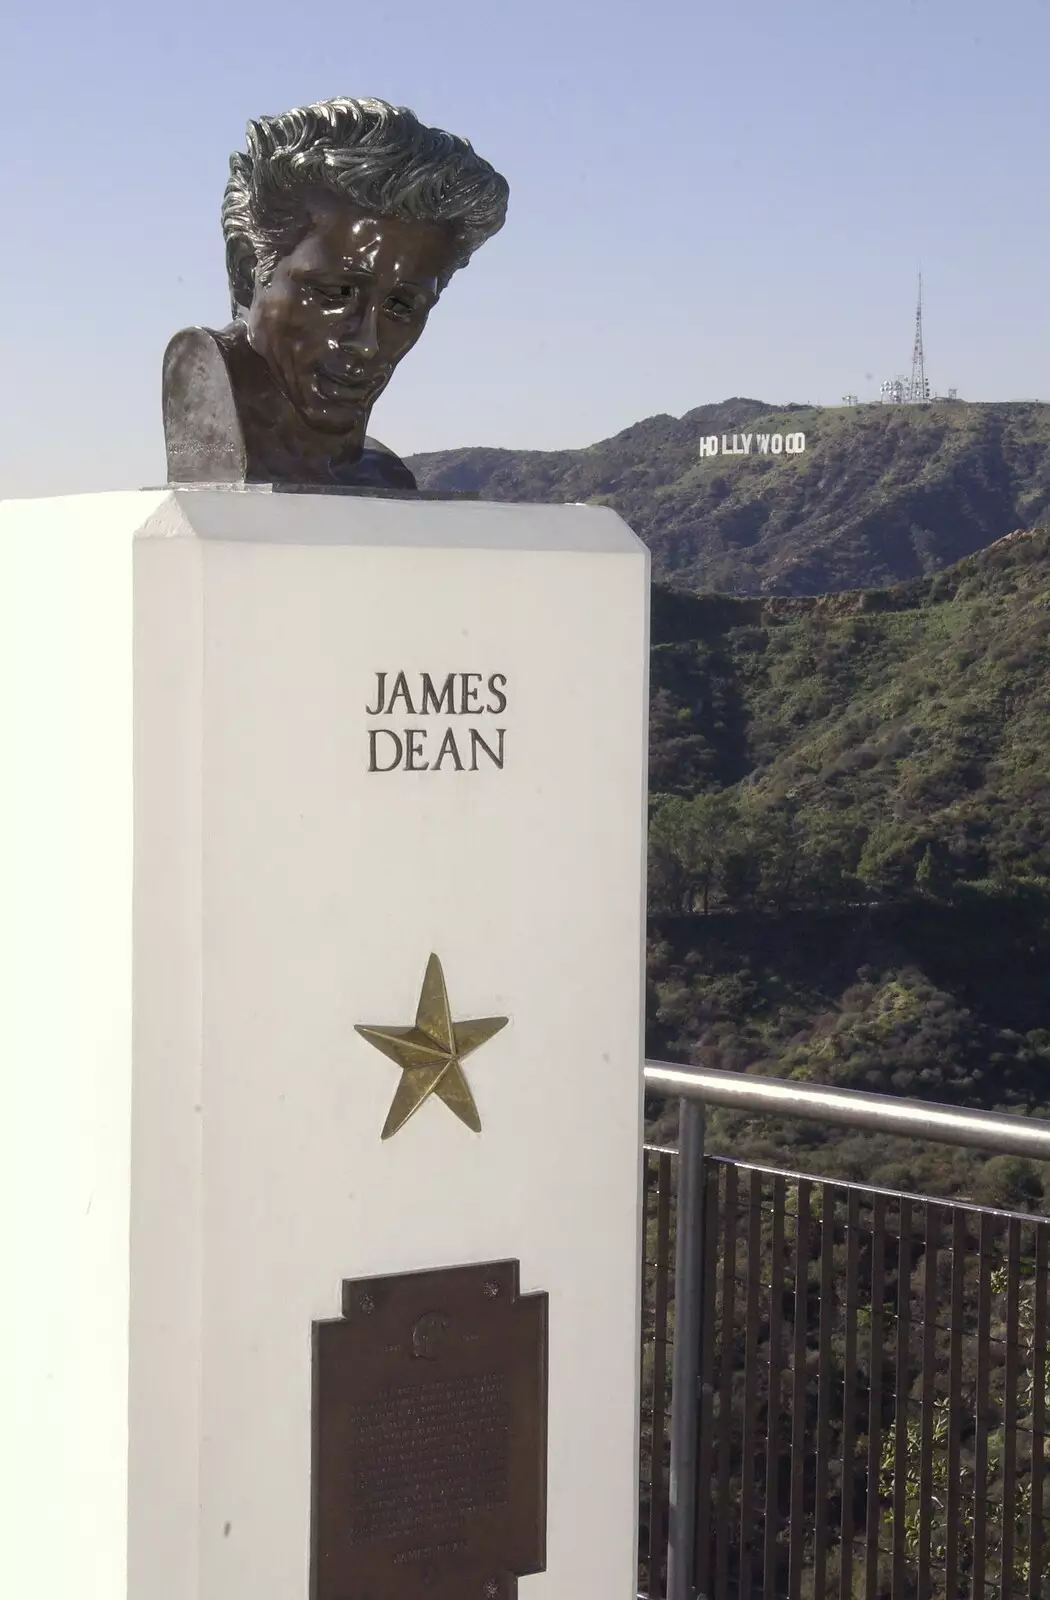 An odd-looking statue of James Dean, from San Diego and Hollywood, California, US - 3rd March 2008